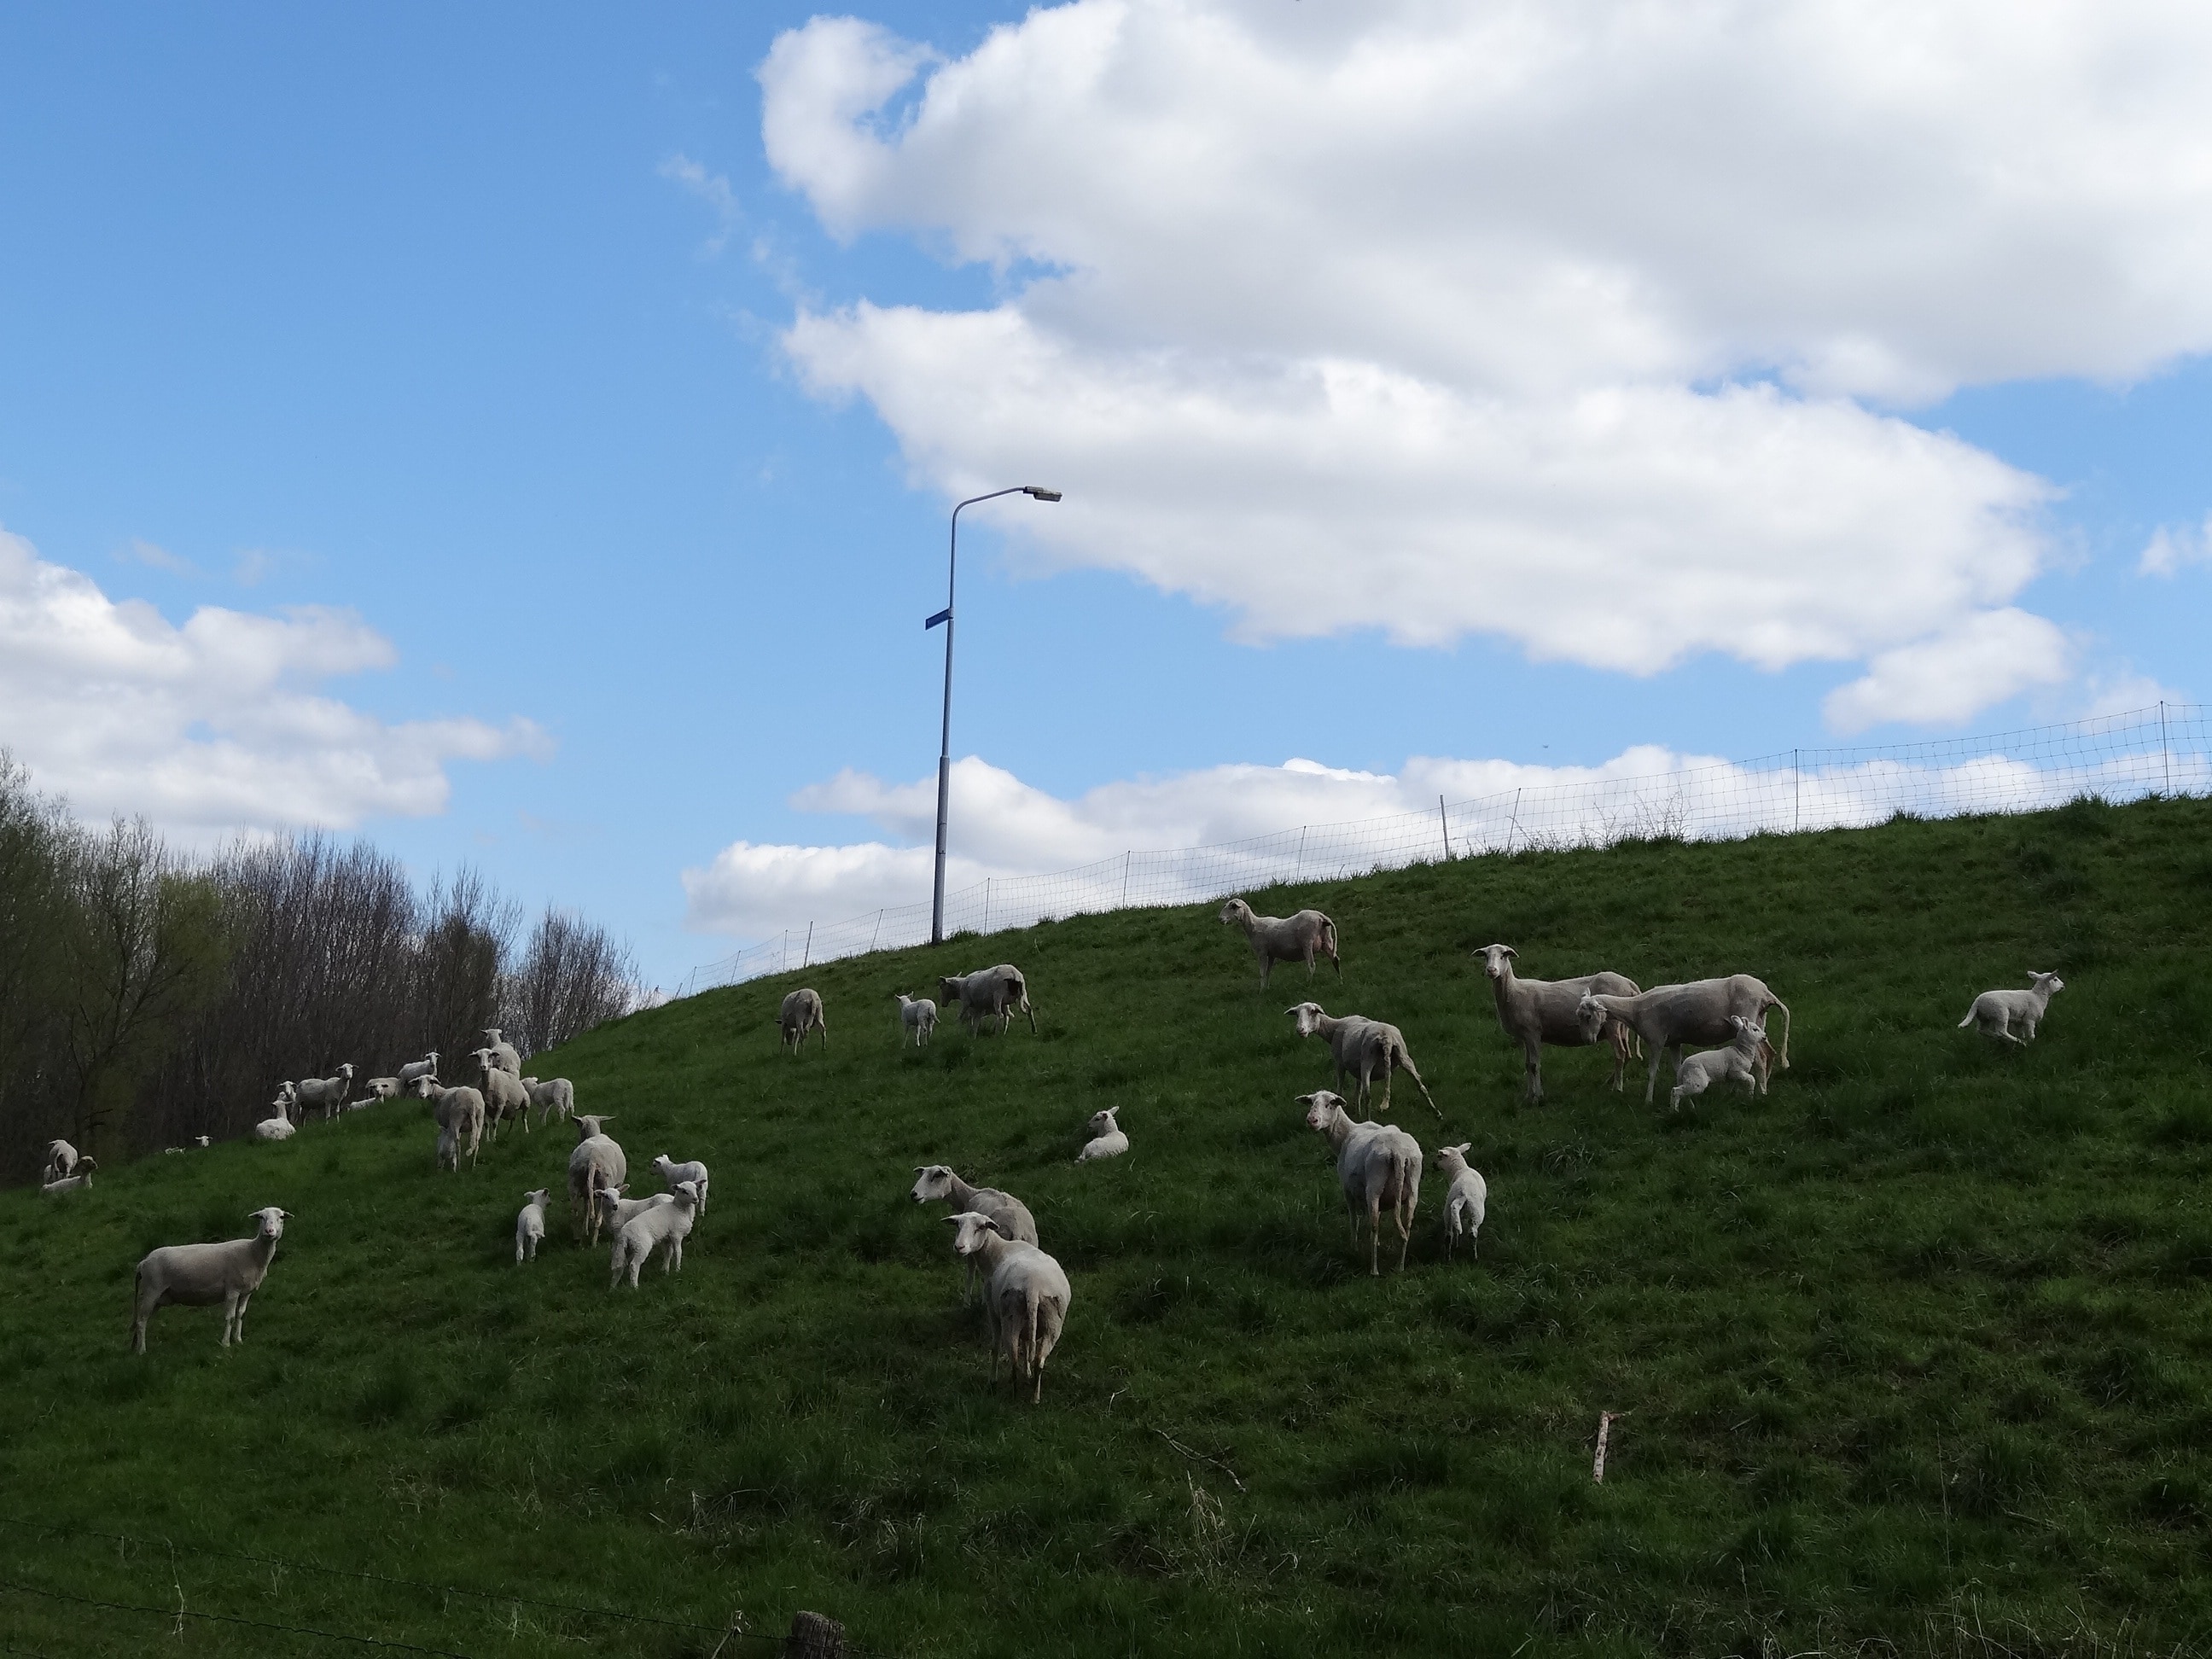 lambs roaming on grass plains during day time